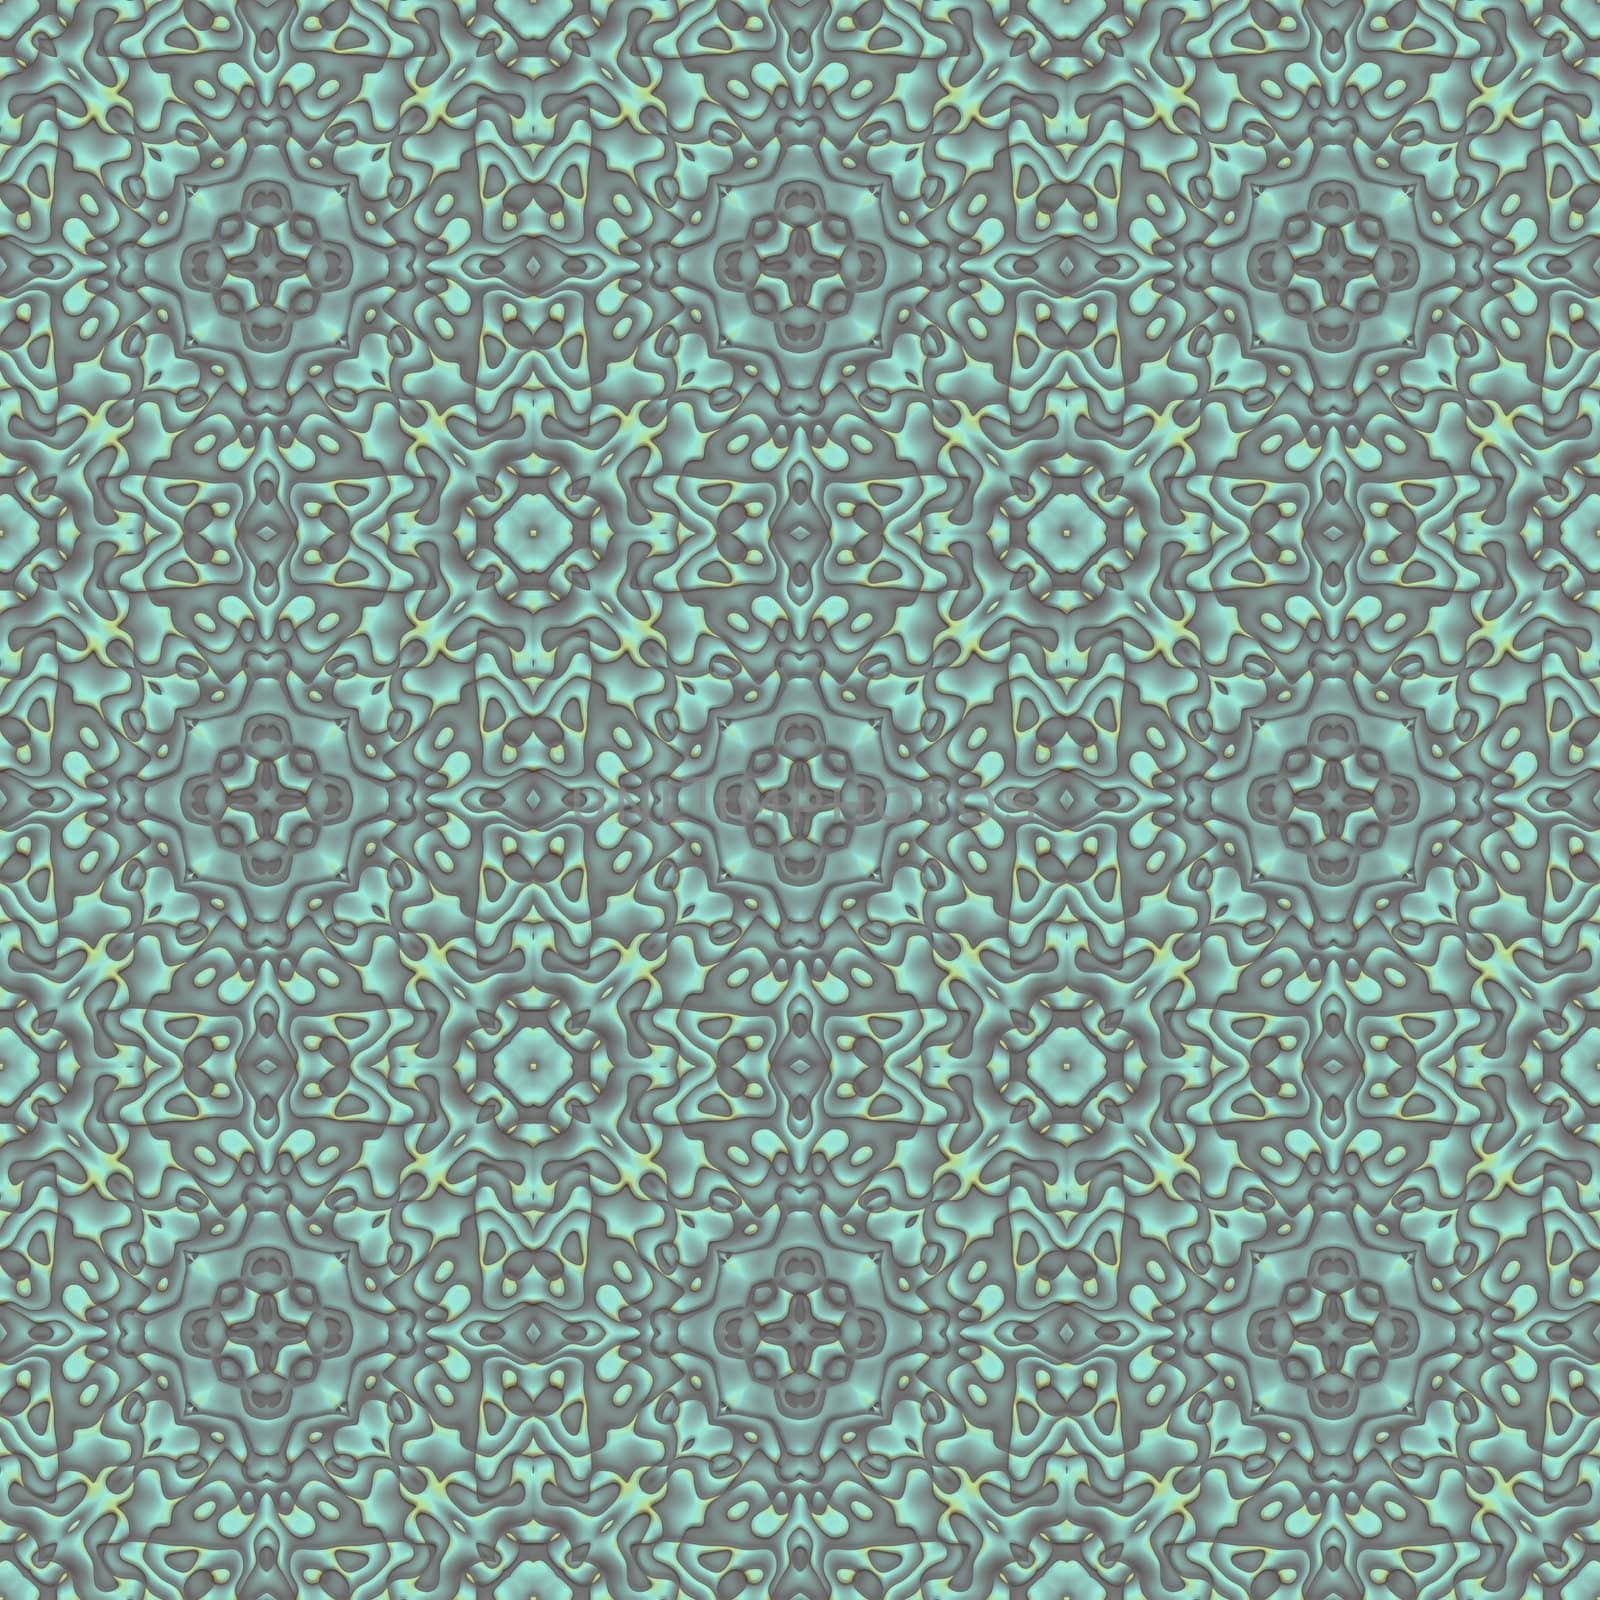 An image of a nice abstract background seamless tiles